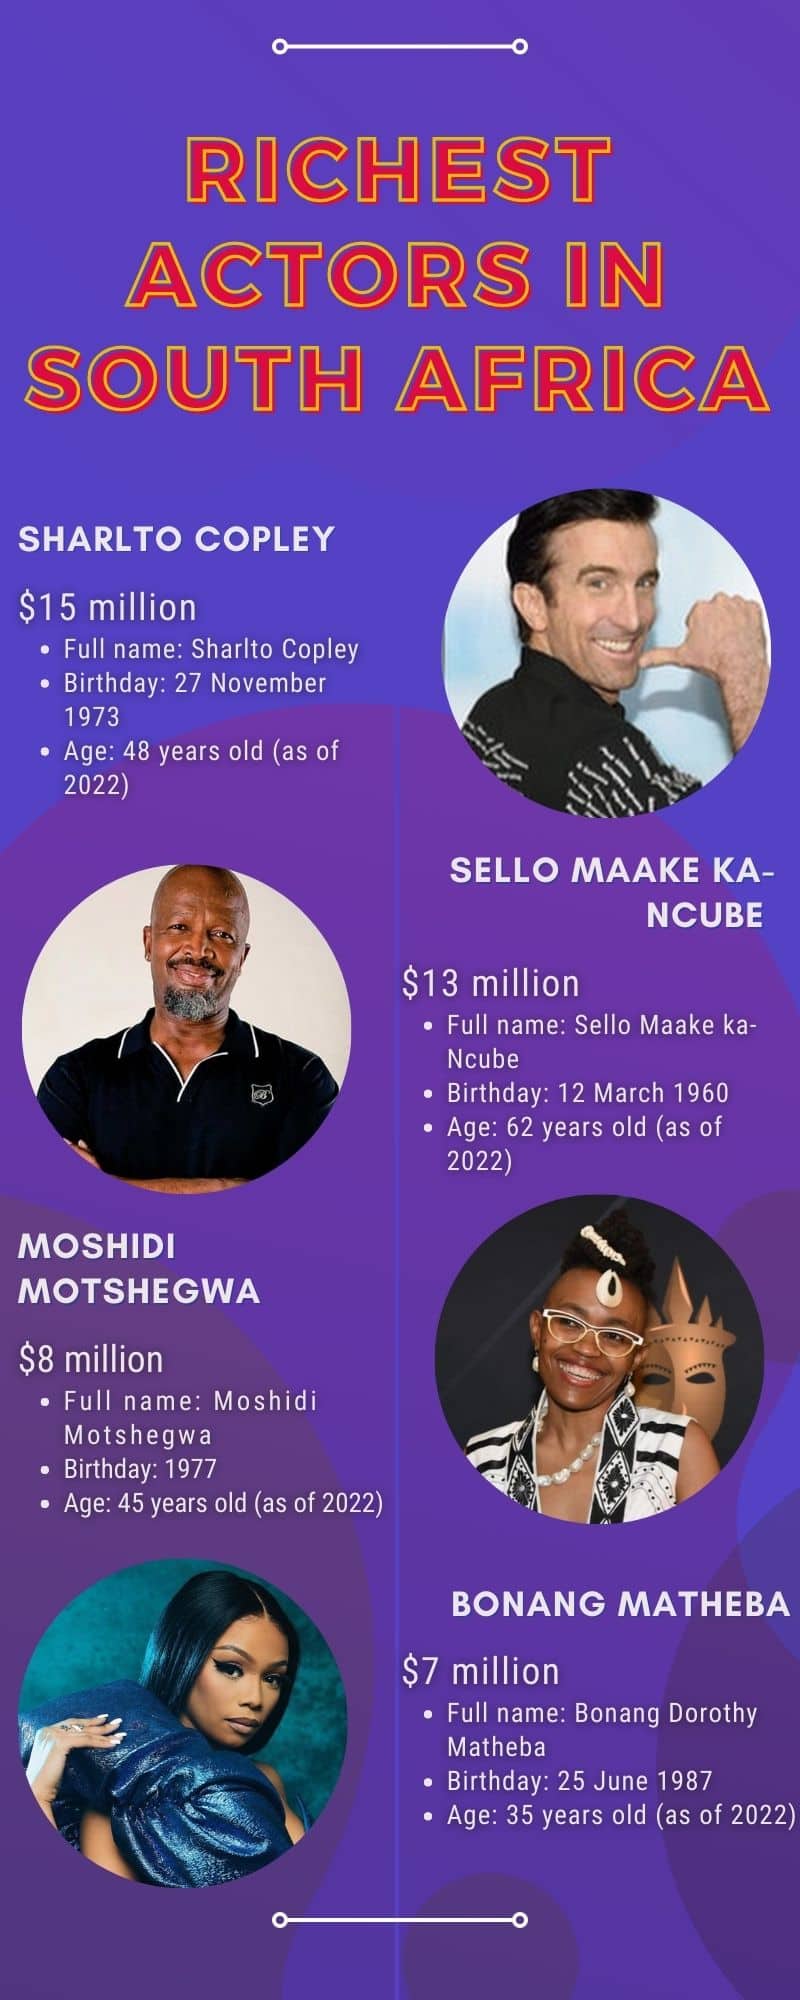 RIchest actors in South Africa